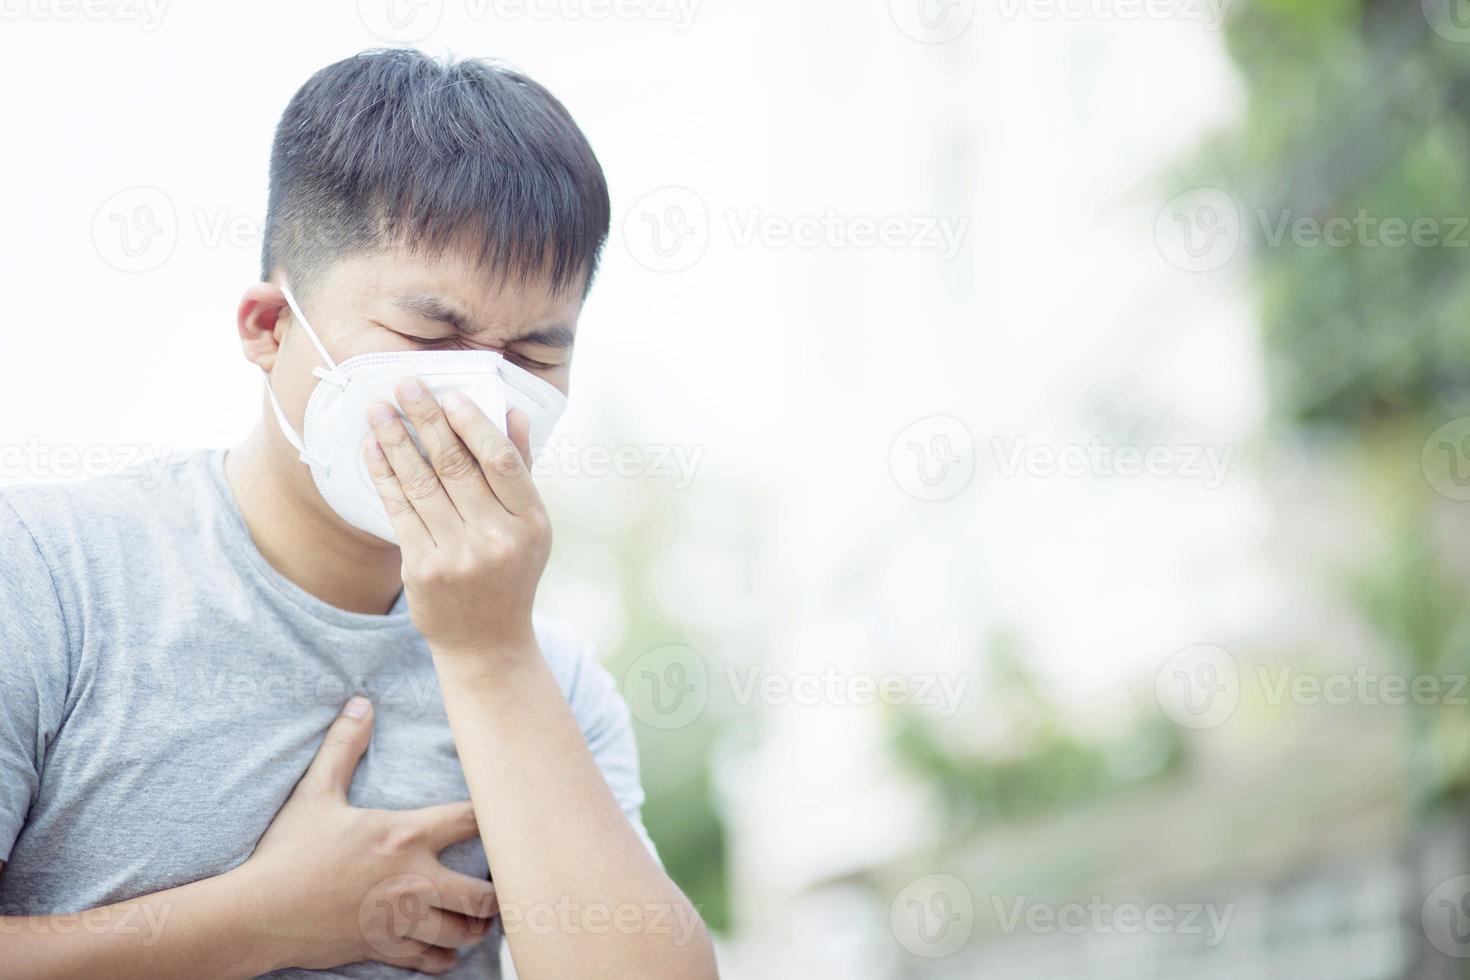 This man had a cough until chest pain photo